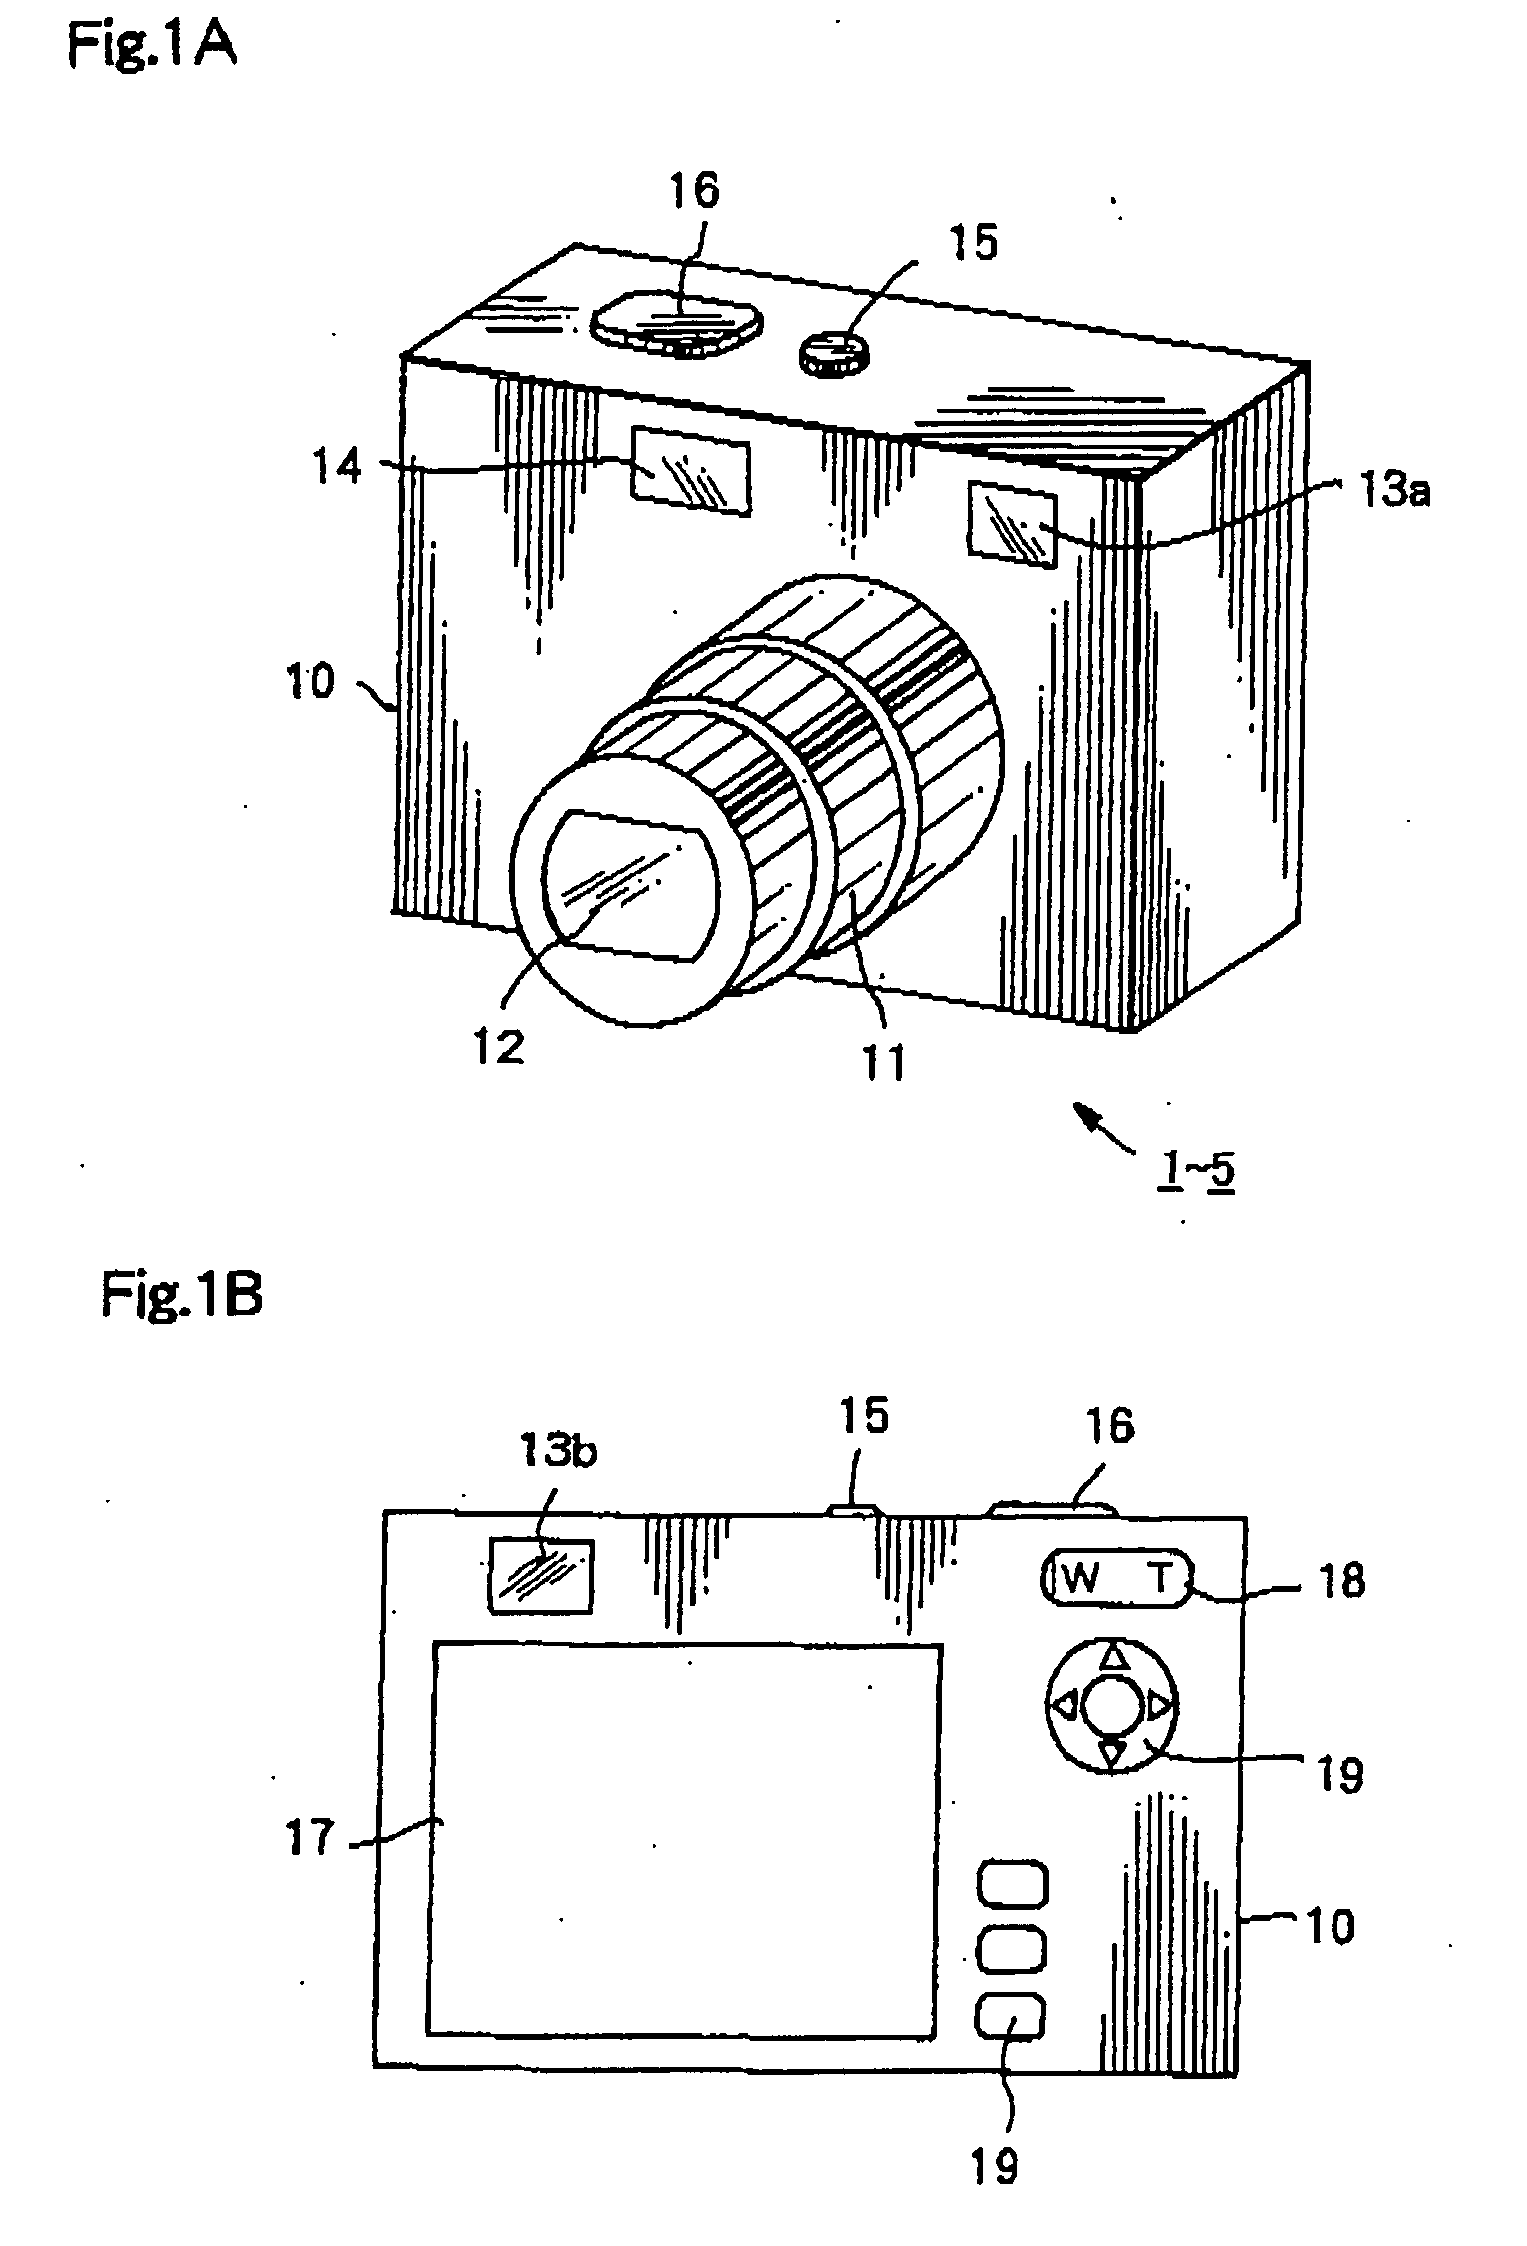 Taking lens system and image capturing apparatus